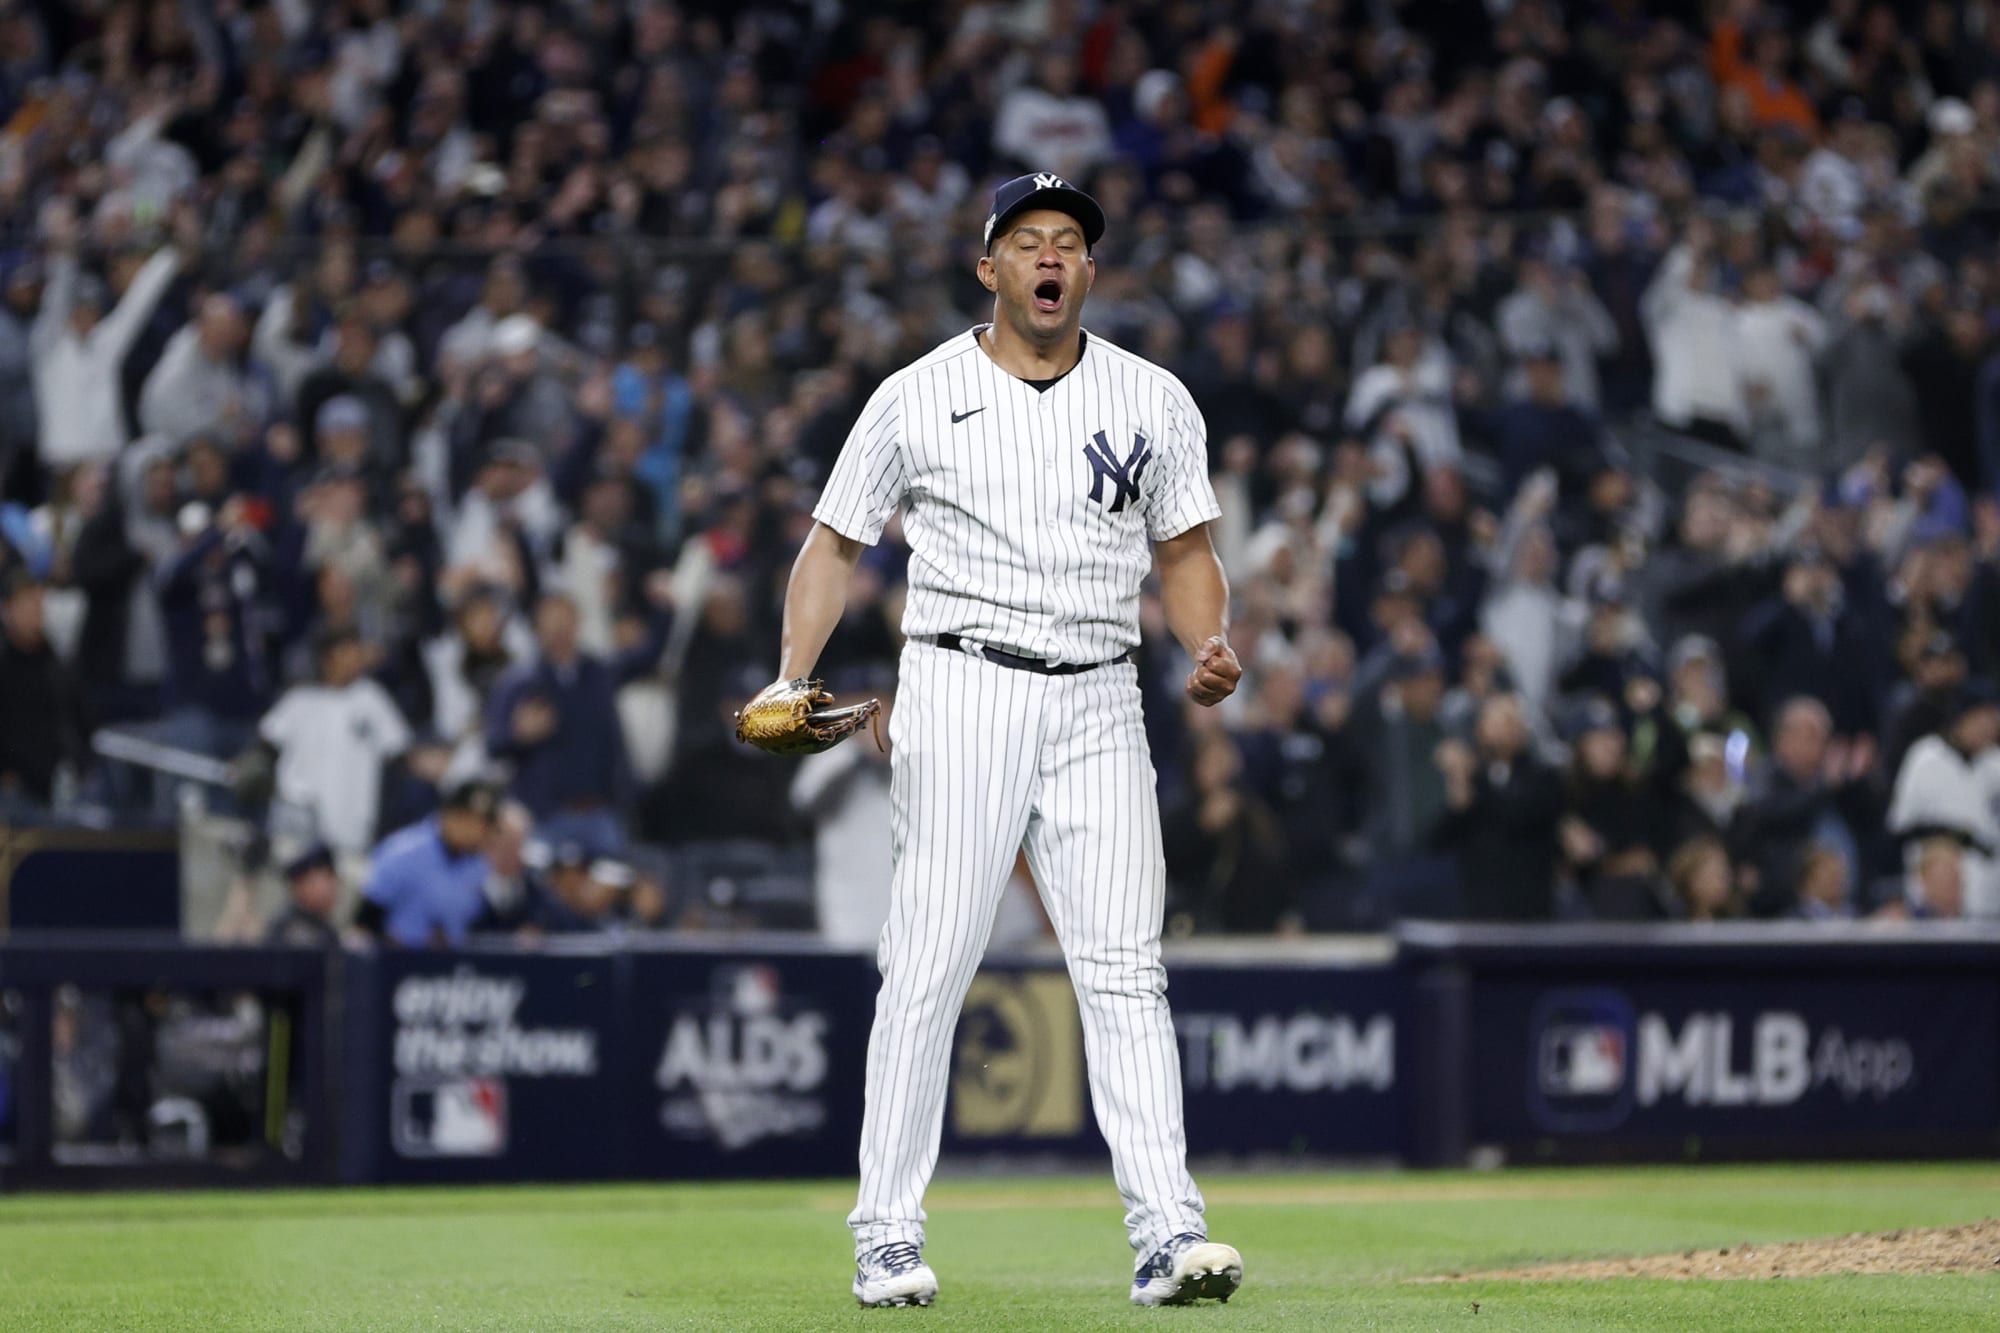 Wandy Peralta's end-of-season IG post to Yankees fans shows he 'gets it' -  BVM Sports